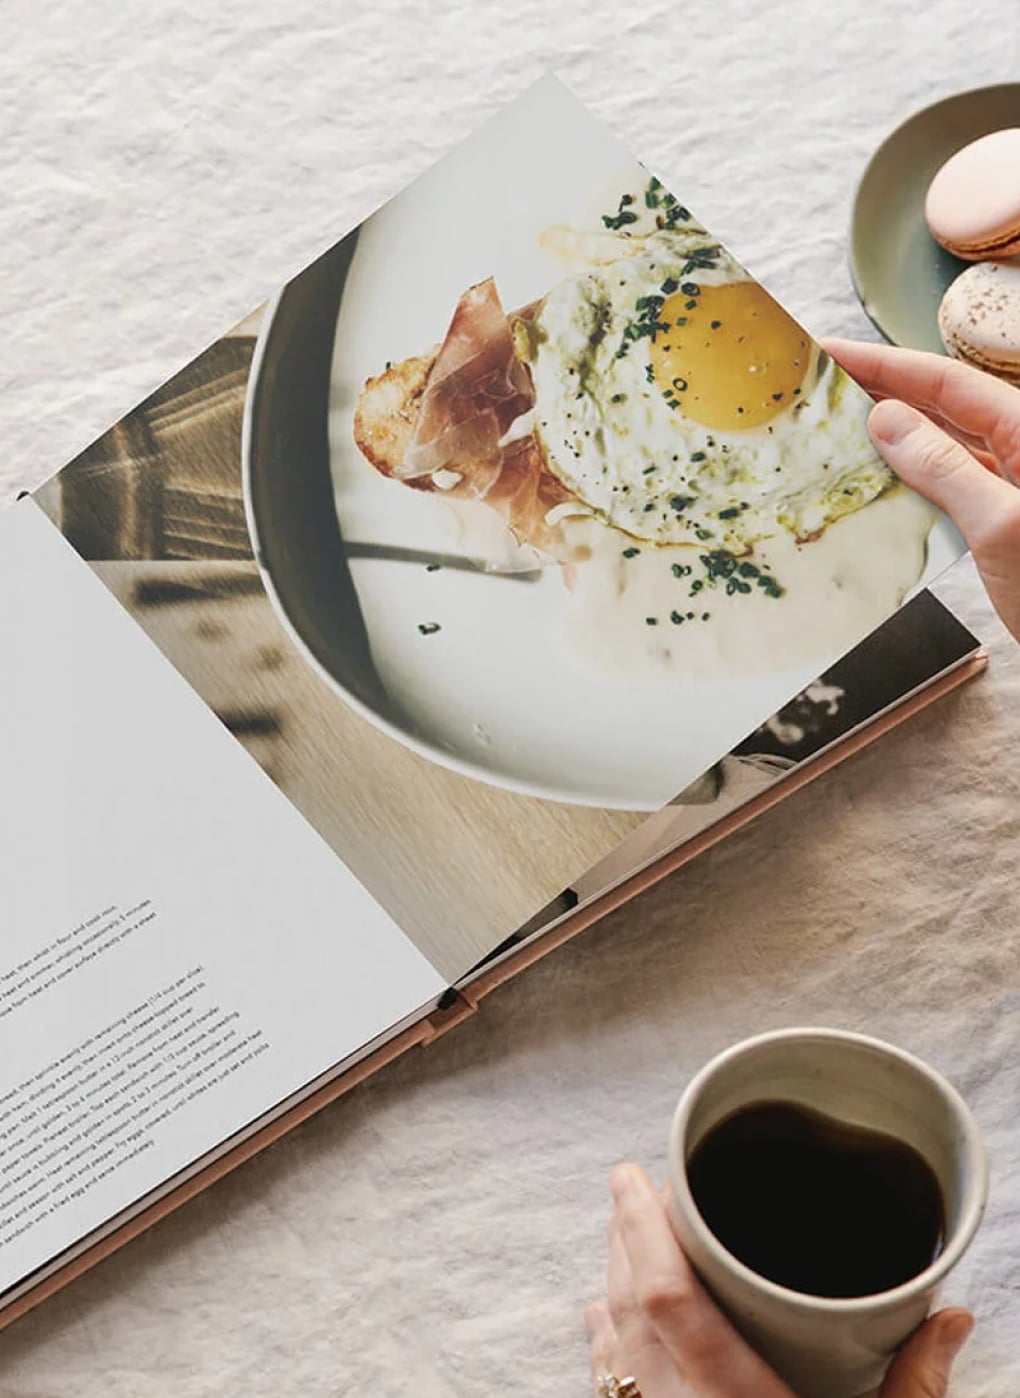 Custom photo book cookbook with picture of breakfast dish and recipe